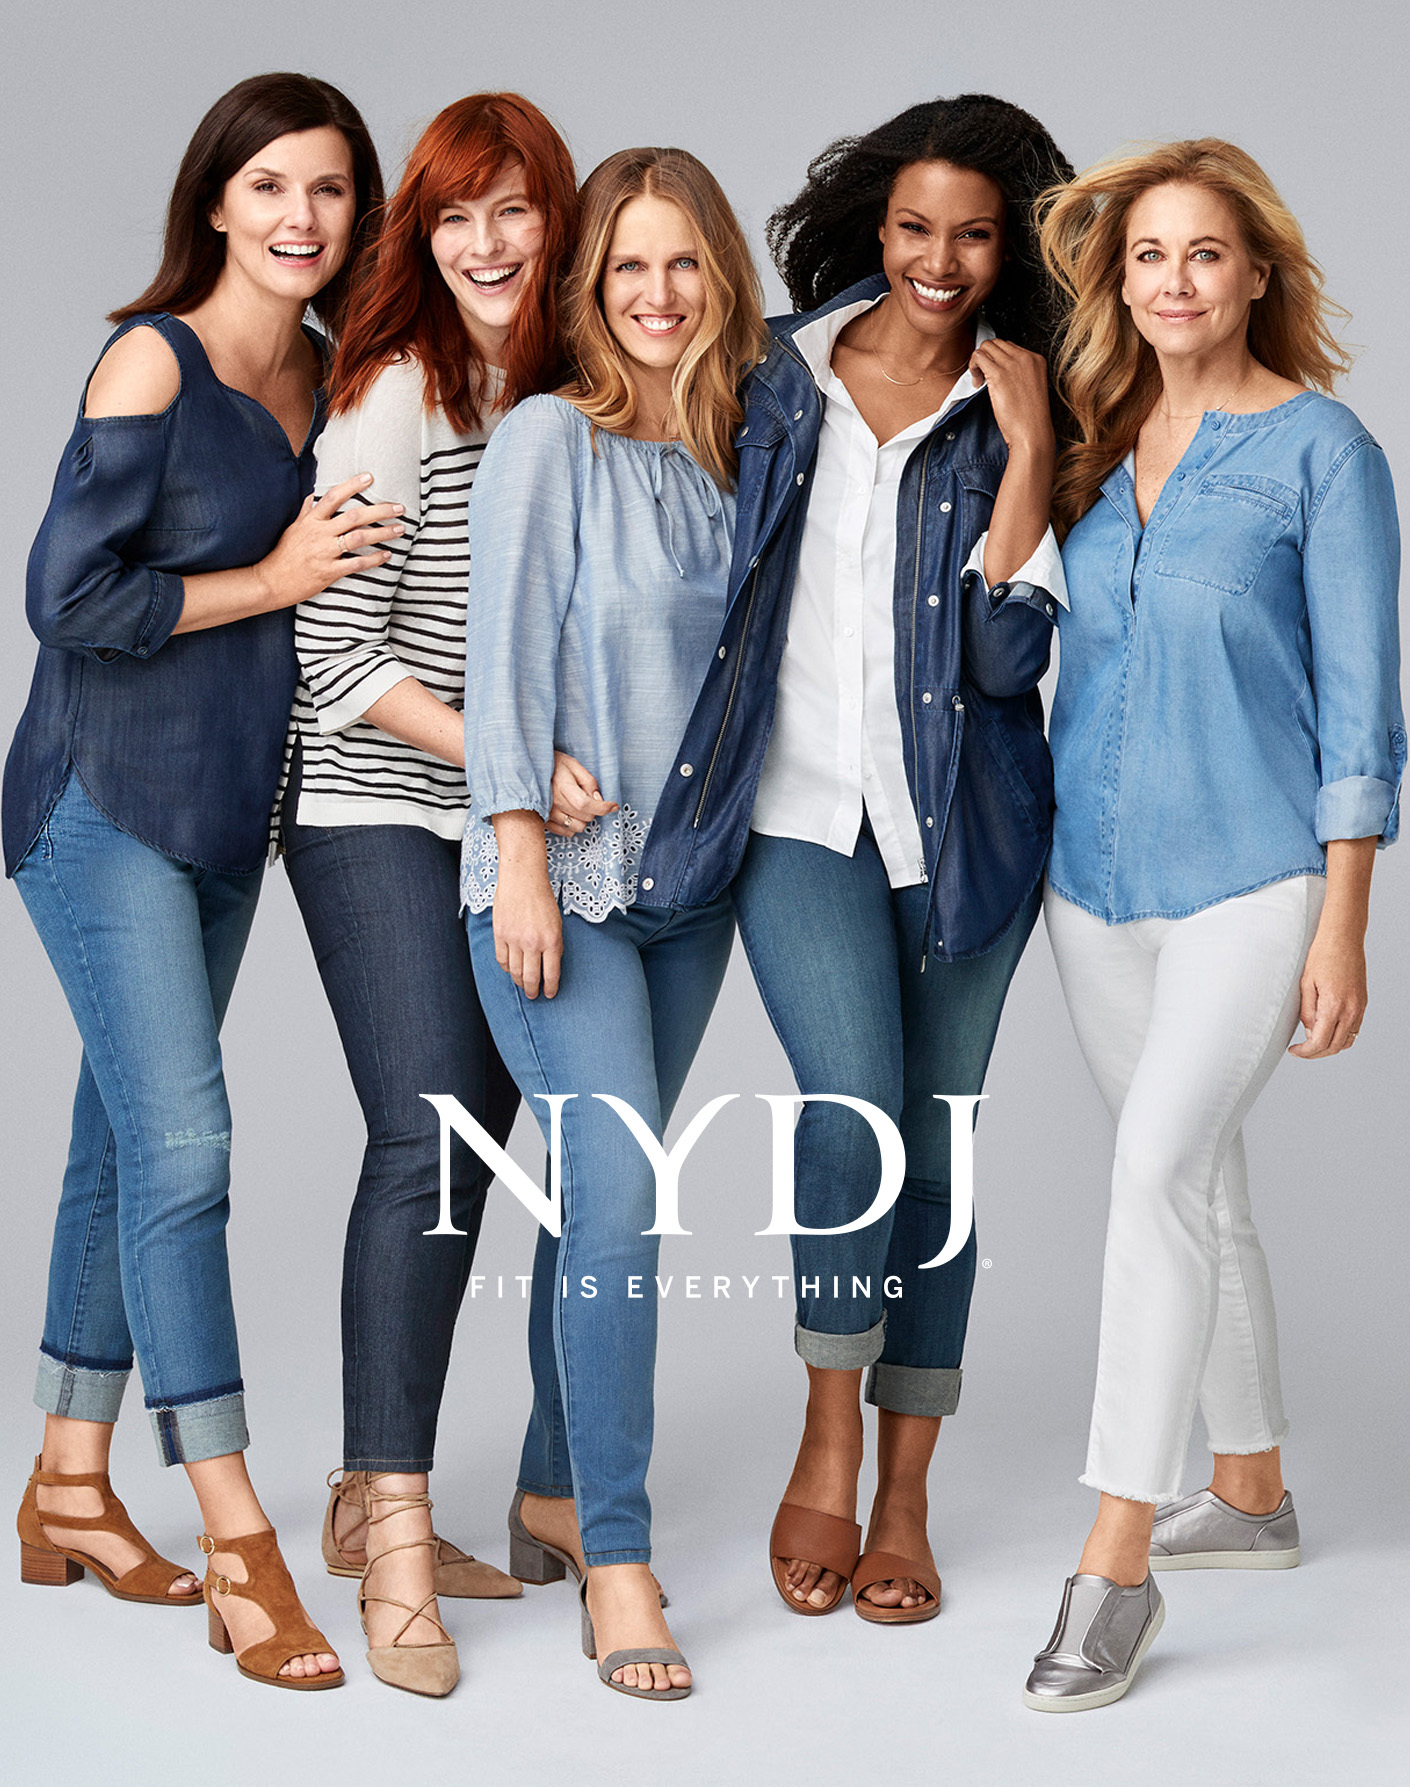 Denim Brand NYDJ Goes Hyper-Local in the Twin Cities - Mpls.St.Paul Magazine